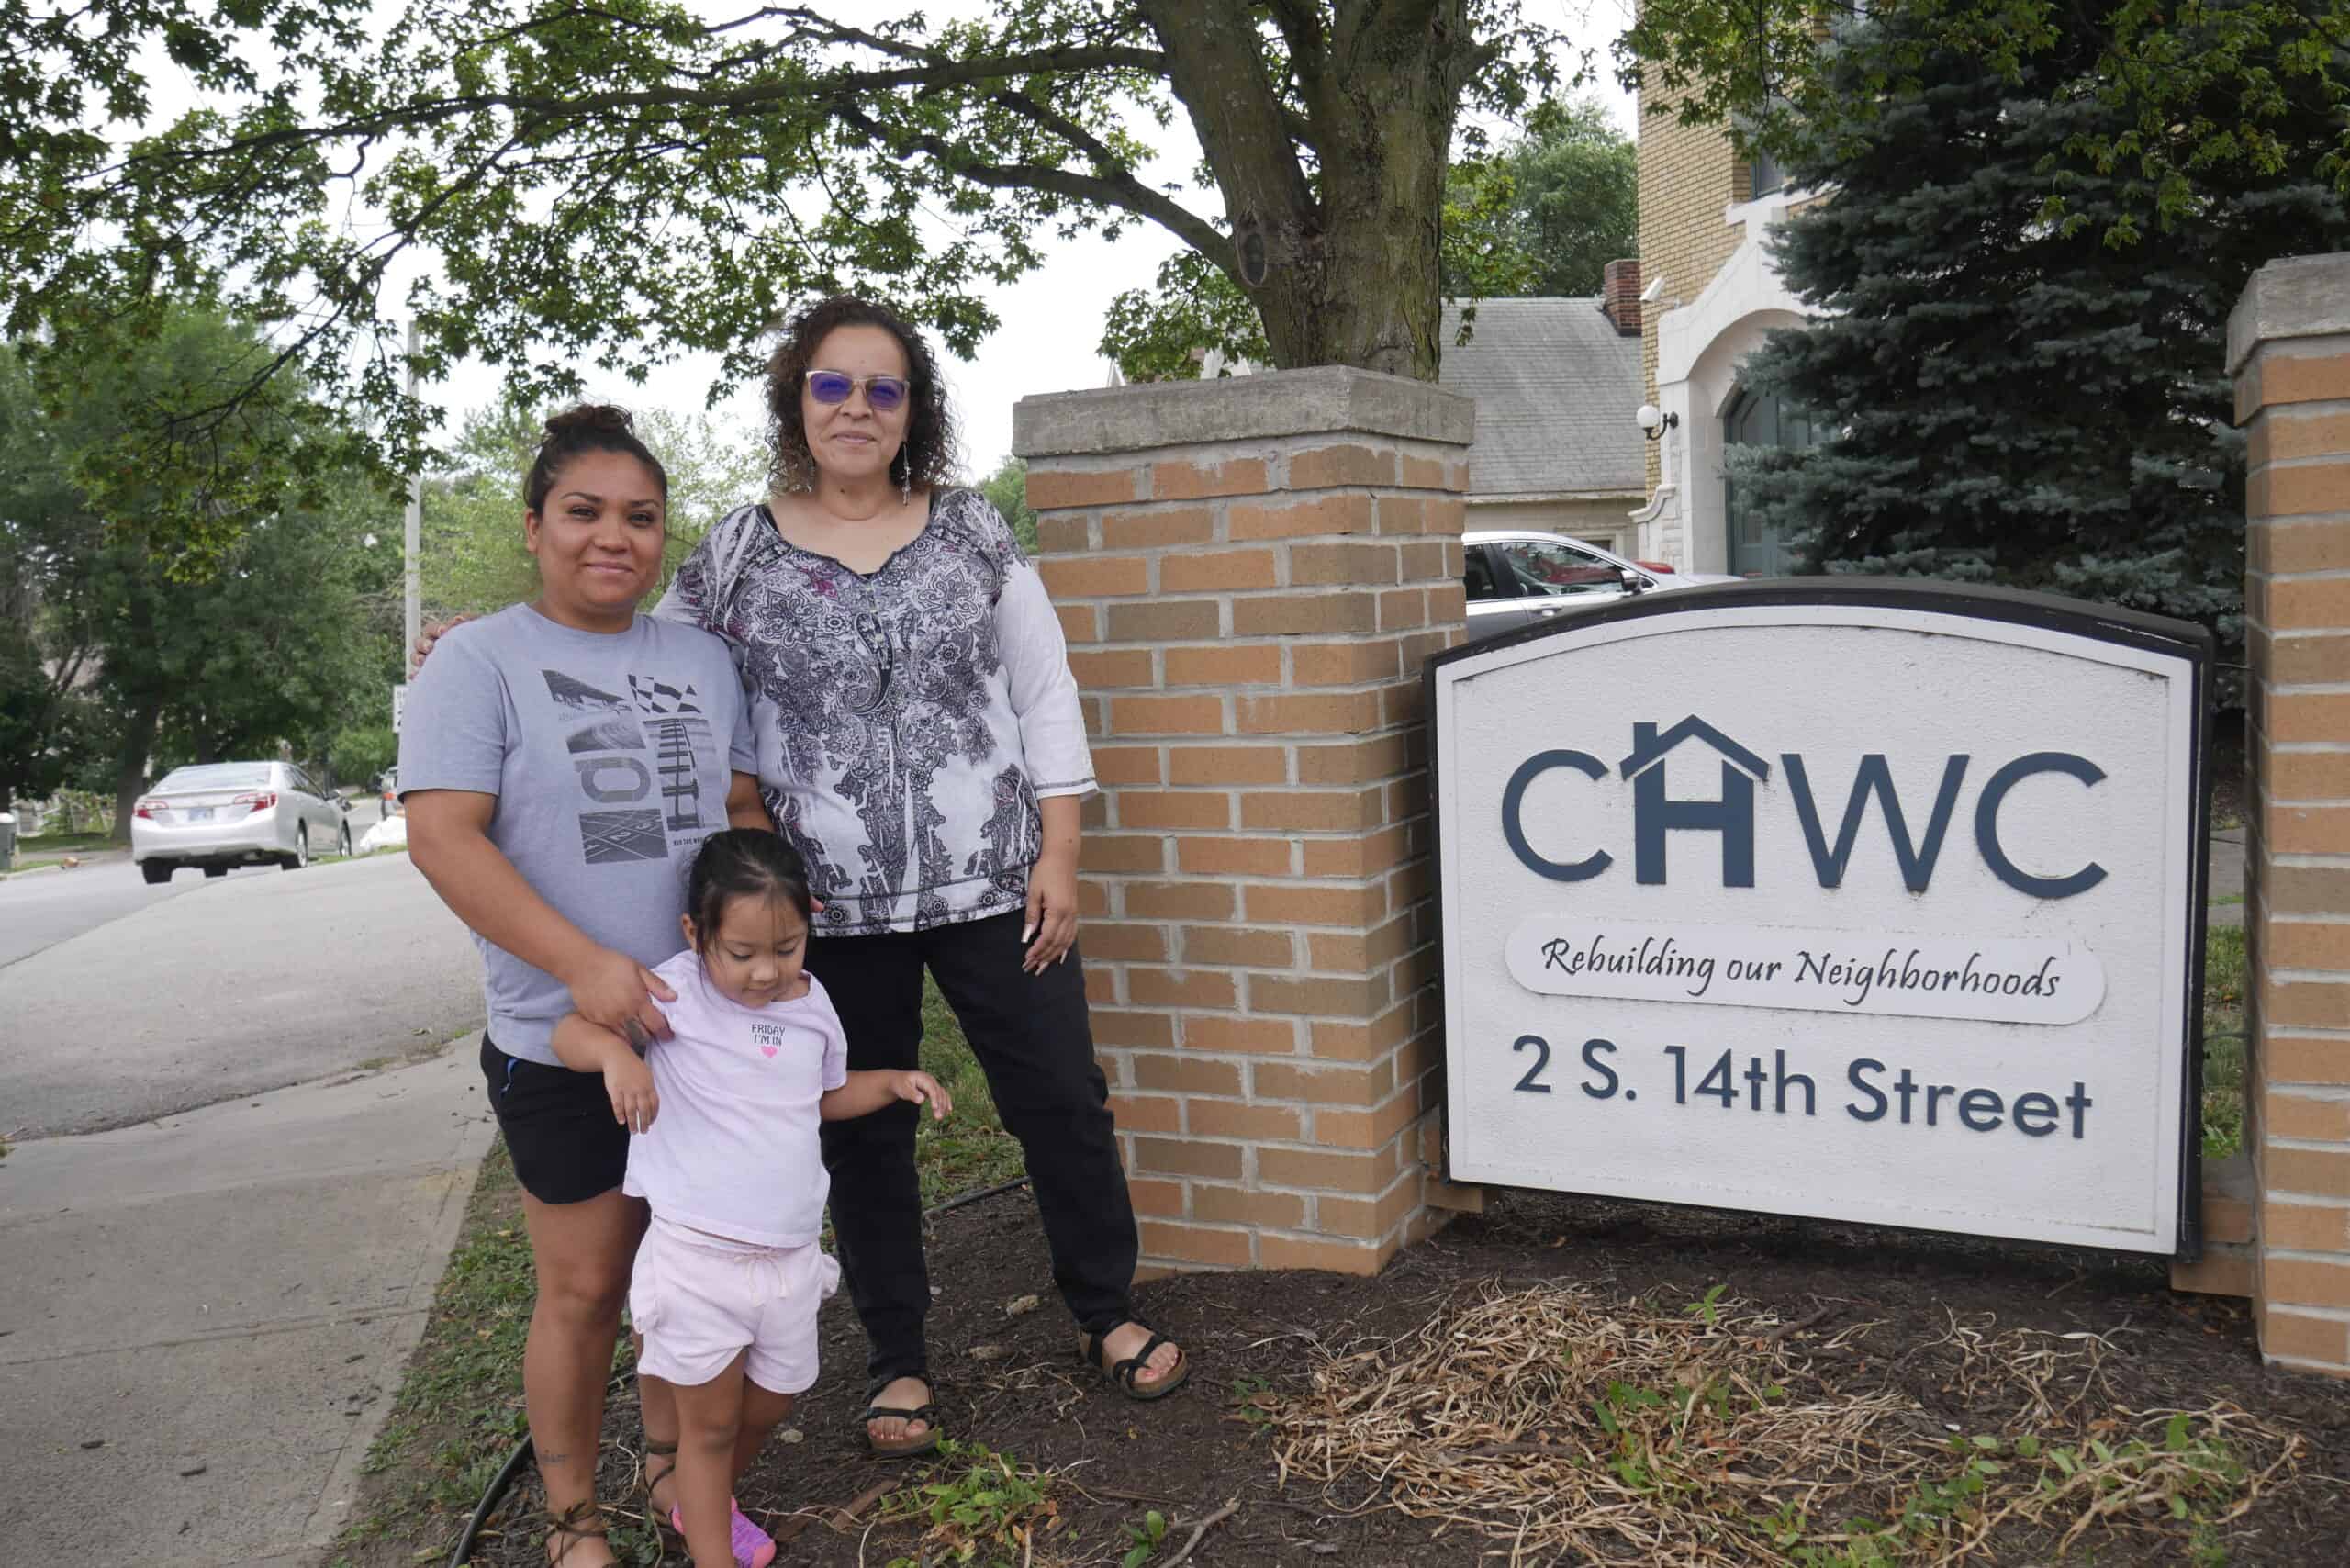 Rita and her daughter stand with Gloria, the CHWC housing counselor who's worked with them, outside of CHWC's office. 